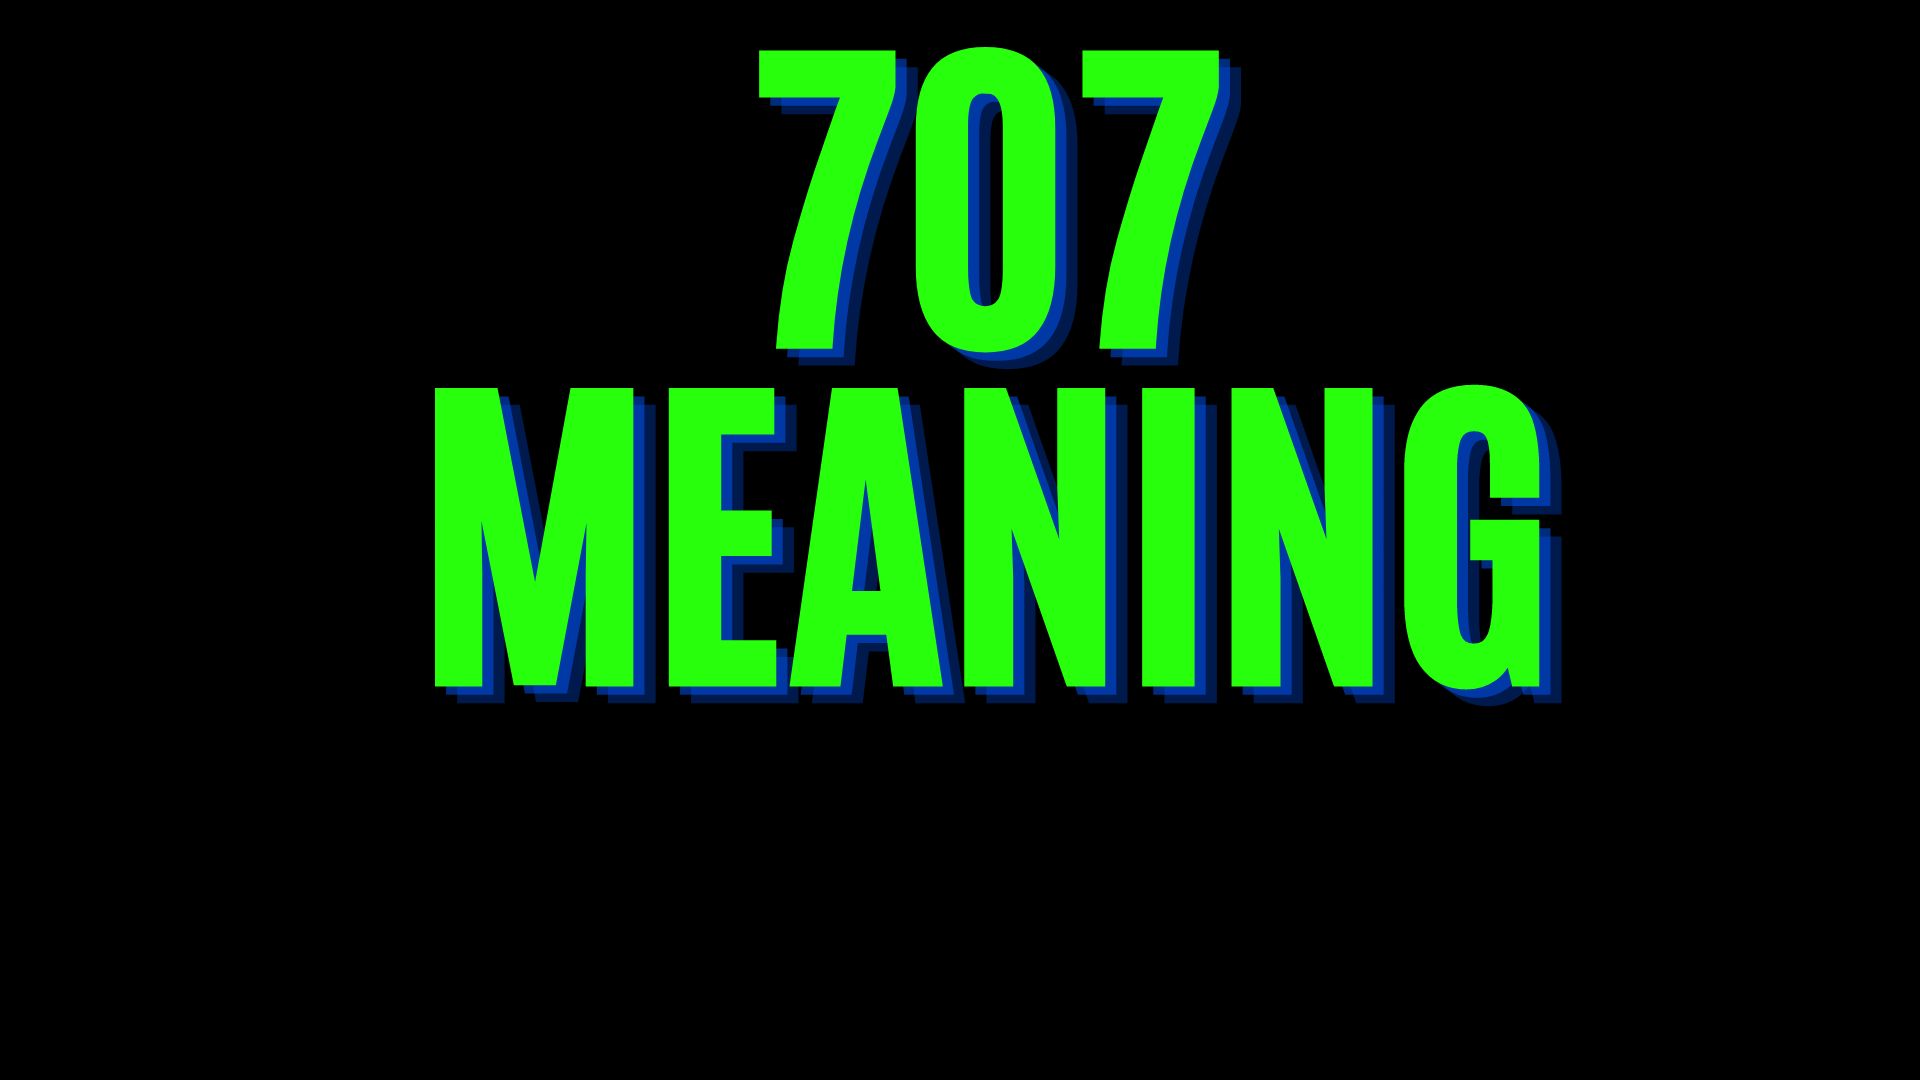 707 Meaning - How 707 Can Guide Your Spiritual Journey